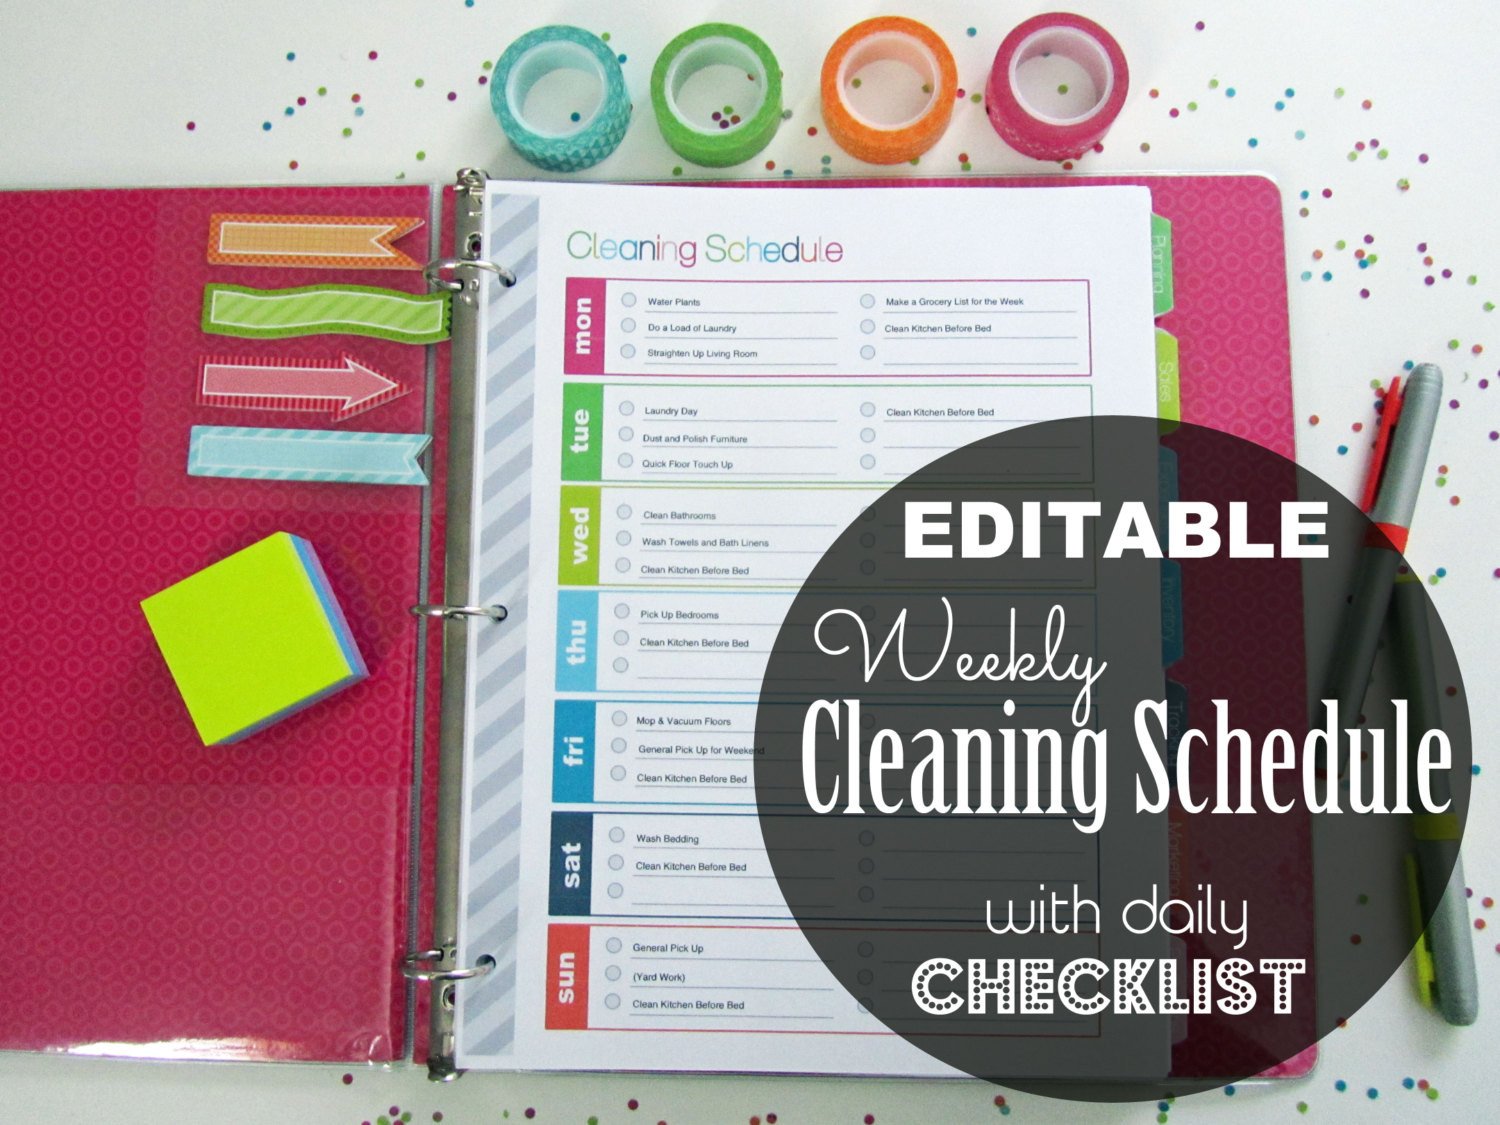 EDITABLE Weekly Cleaning Schedule Checklist by